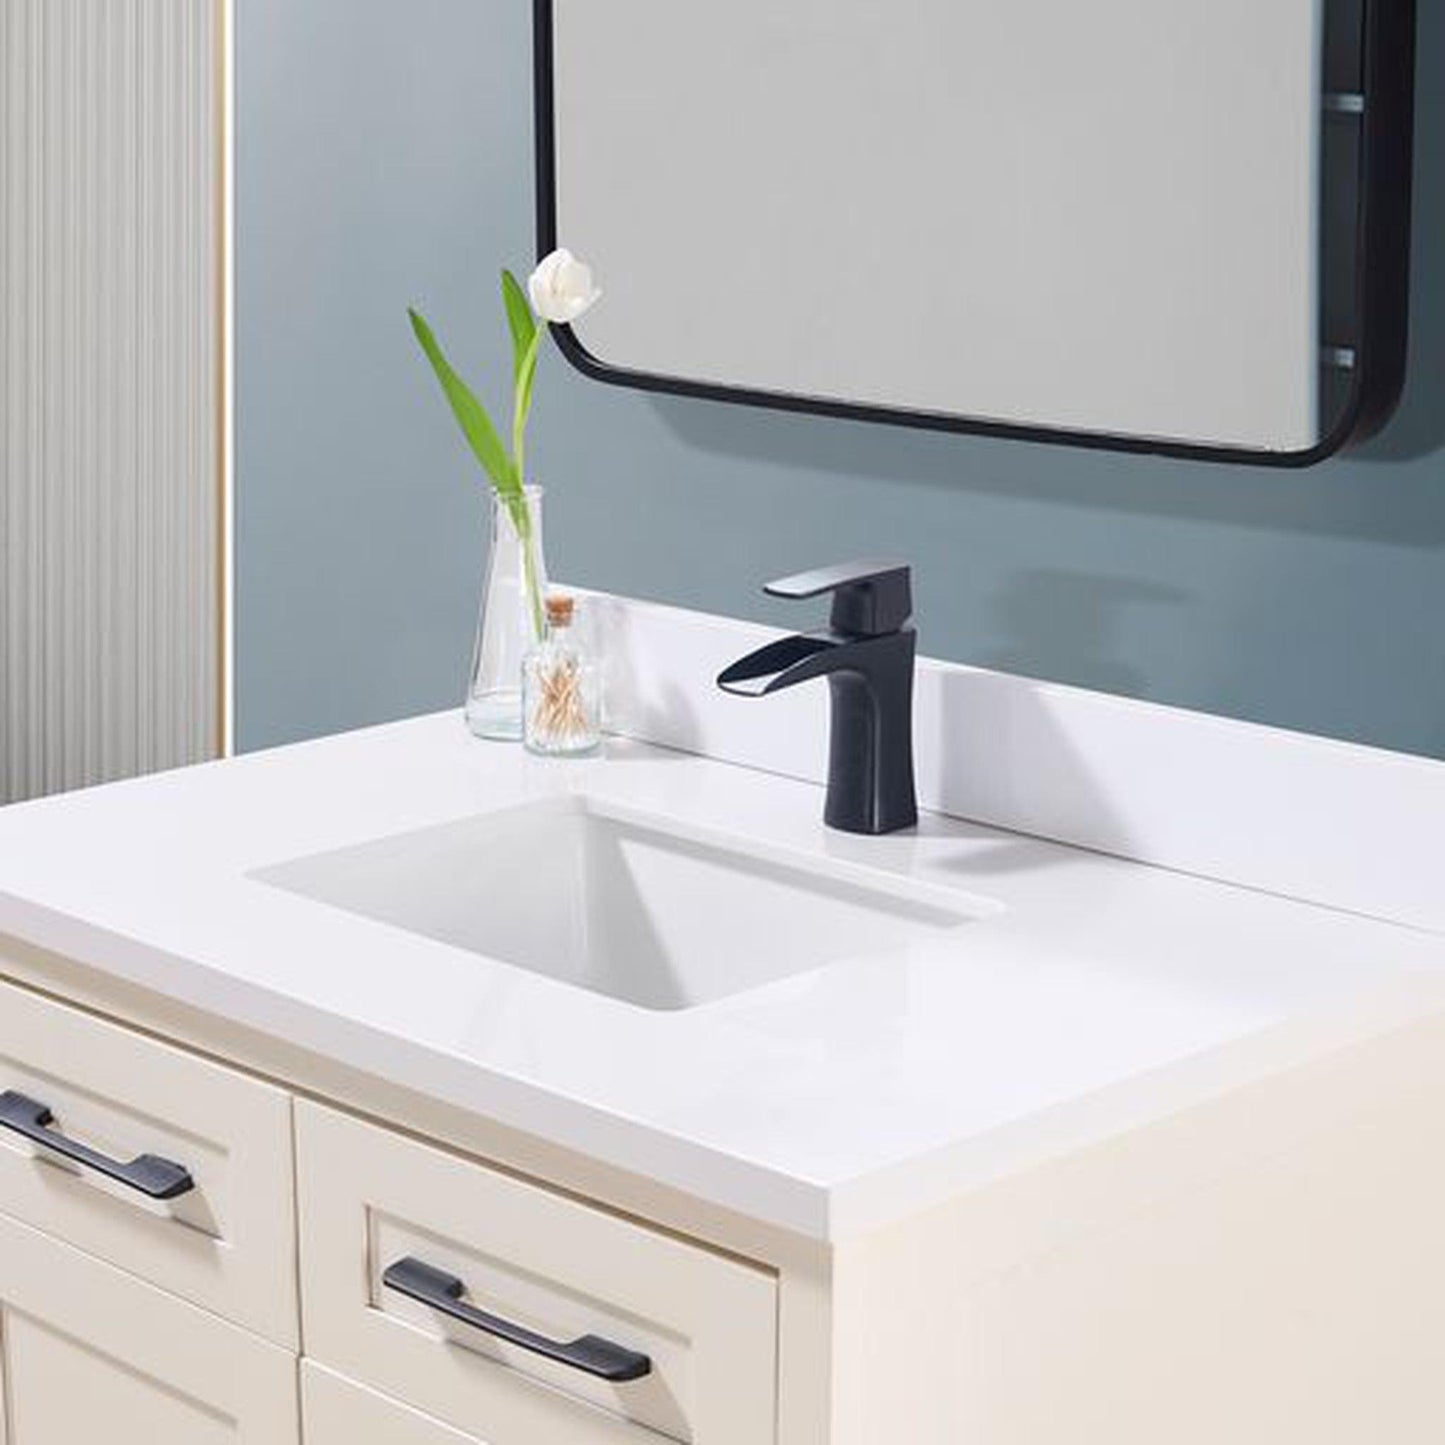 Altair Caorle 37" x 22" Snow White Composite Stone Bathroom Vanity Top With White SInk